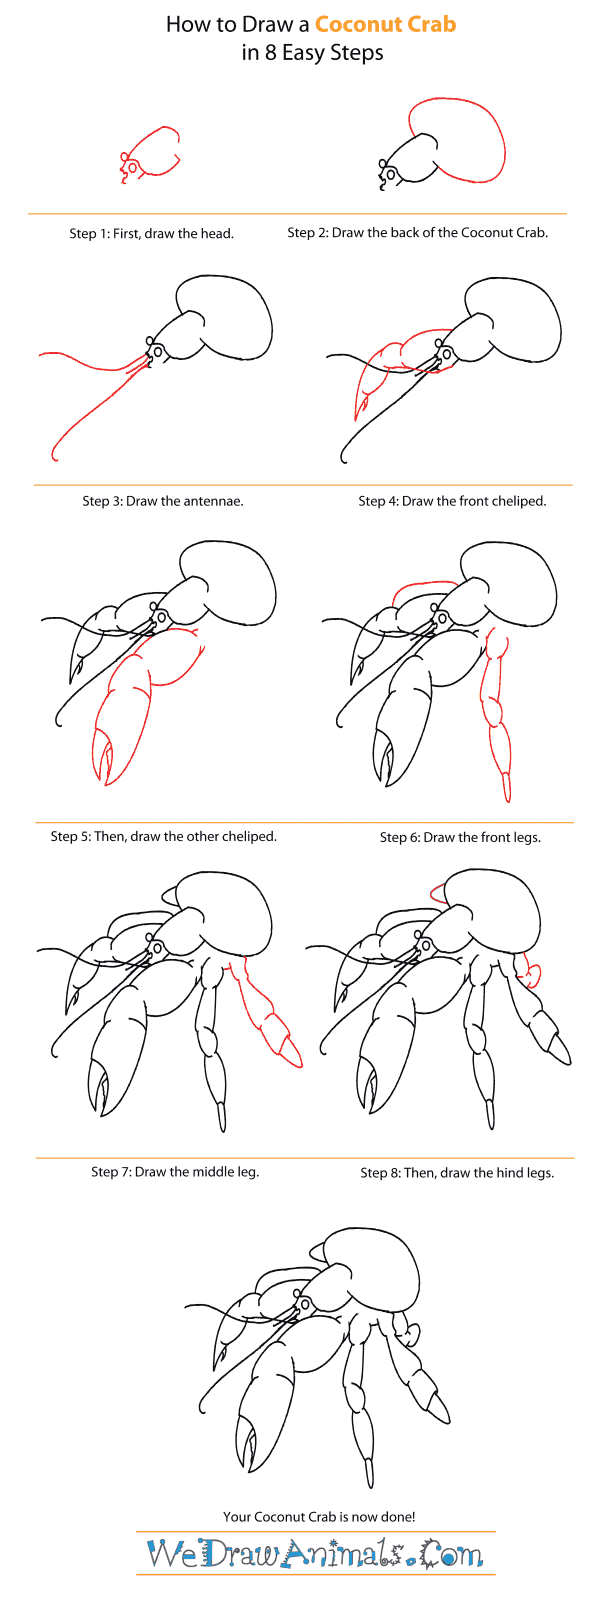 How to Draw a Coconut Crab - Step-By-Step Tutorial